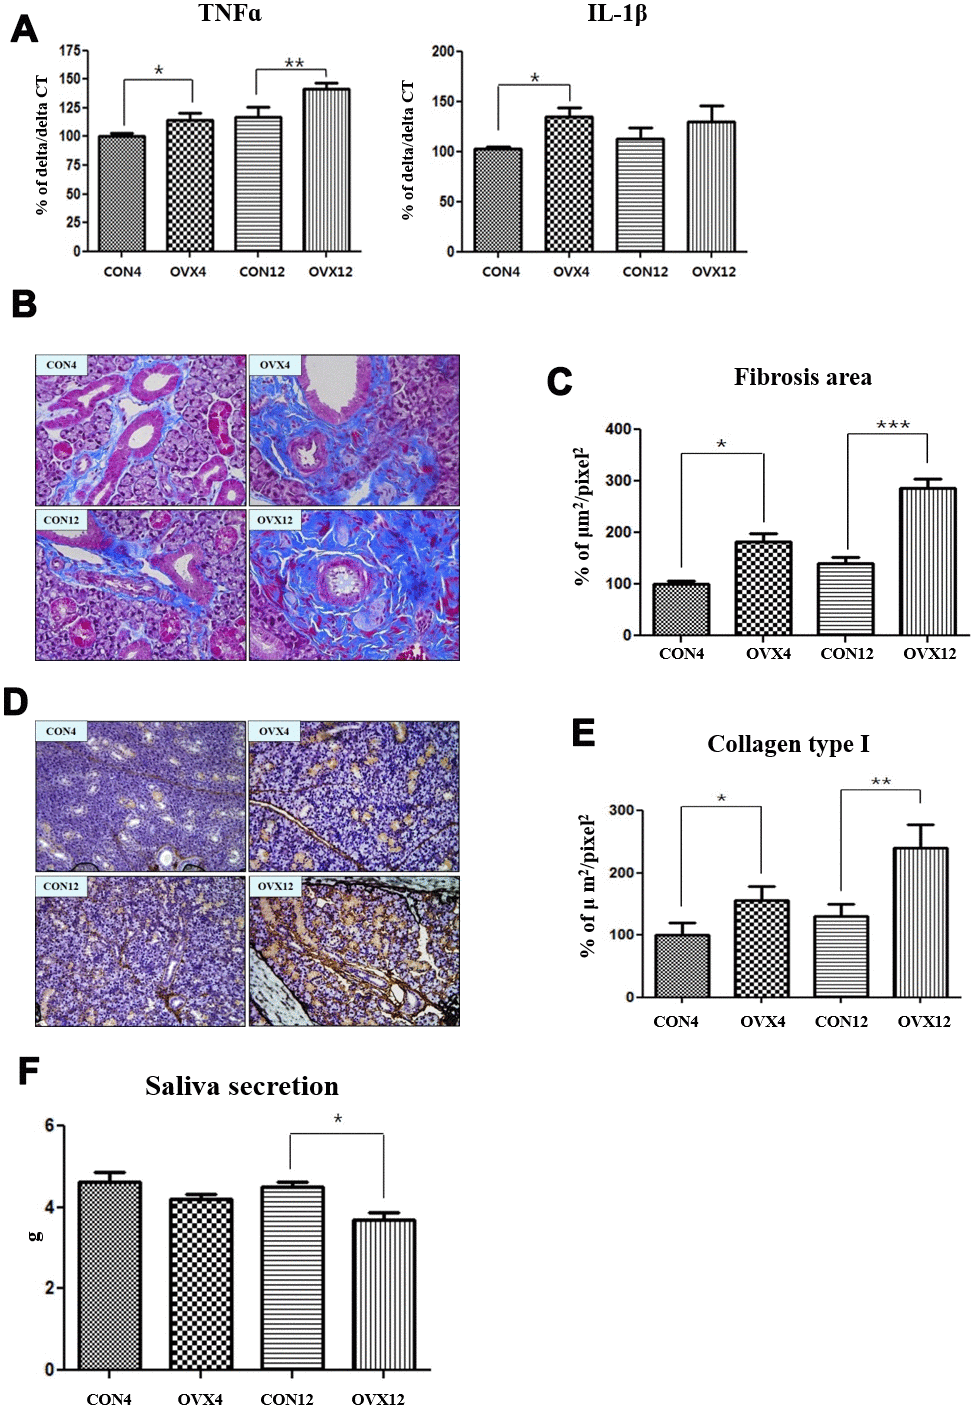 Increased salivary gland fibrosis and decreased salivary gland function. (A) Real time PCR of TNFα and IL-1β mRNA expression in the CON and OVX groups. (B) Fibrosis of submandibular gland detected by Masson and trichrome's staining. (C) Morphometric analysis of fibrosis in submandibular gland tissue in the CON and OVX groups. (D) Collagen type I expression of submandibular gland detected by immunohistochemistry. (E) Morphometric analysis of expression of collagen type I in the CON and OVX groups. (F) Saliva secretion in the CON and OVX groups. Two-way ANOVA test. *ppp